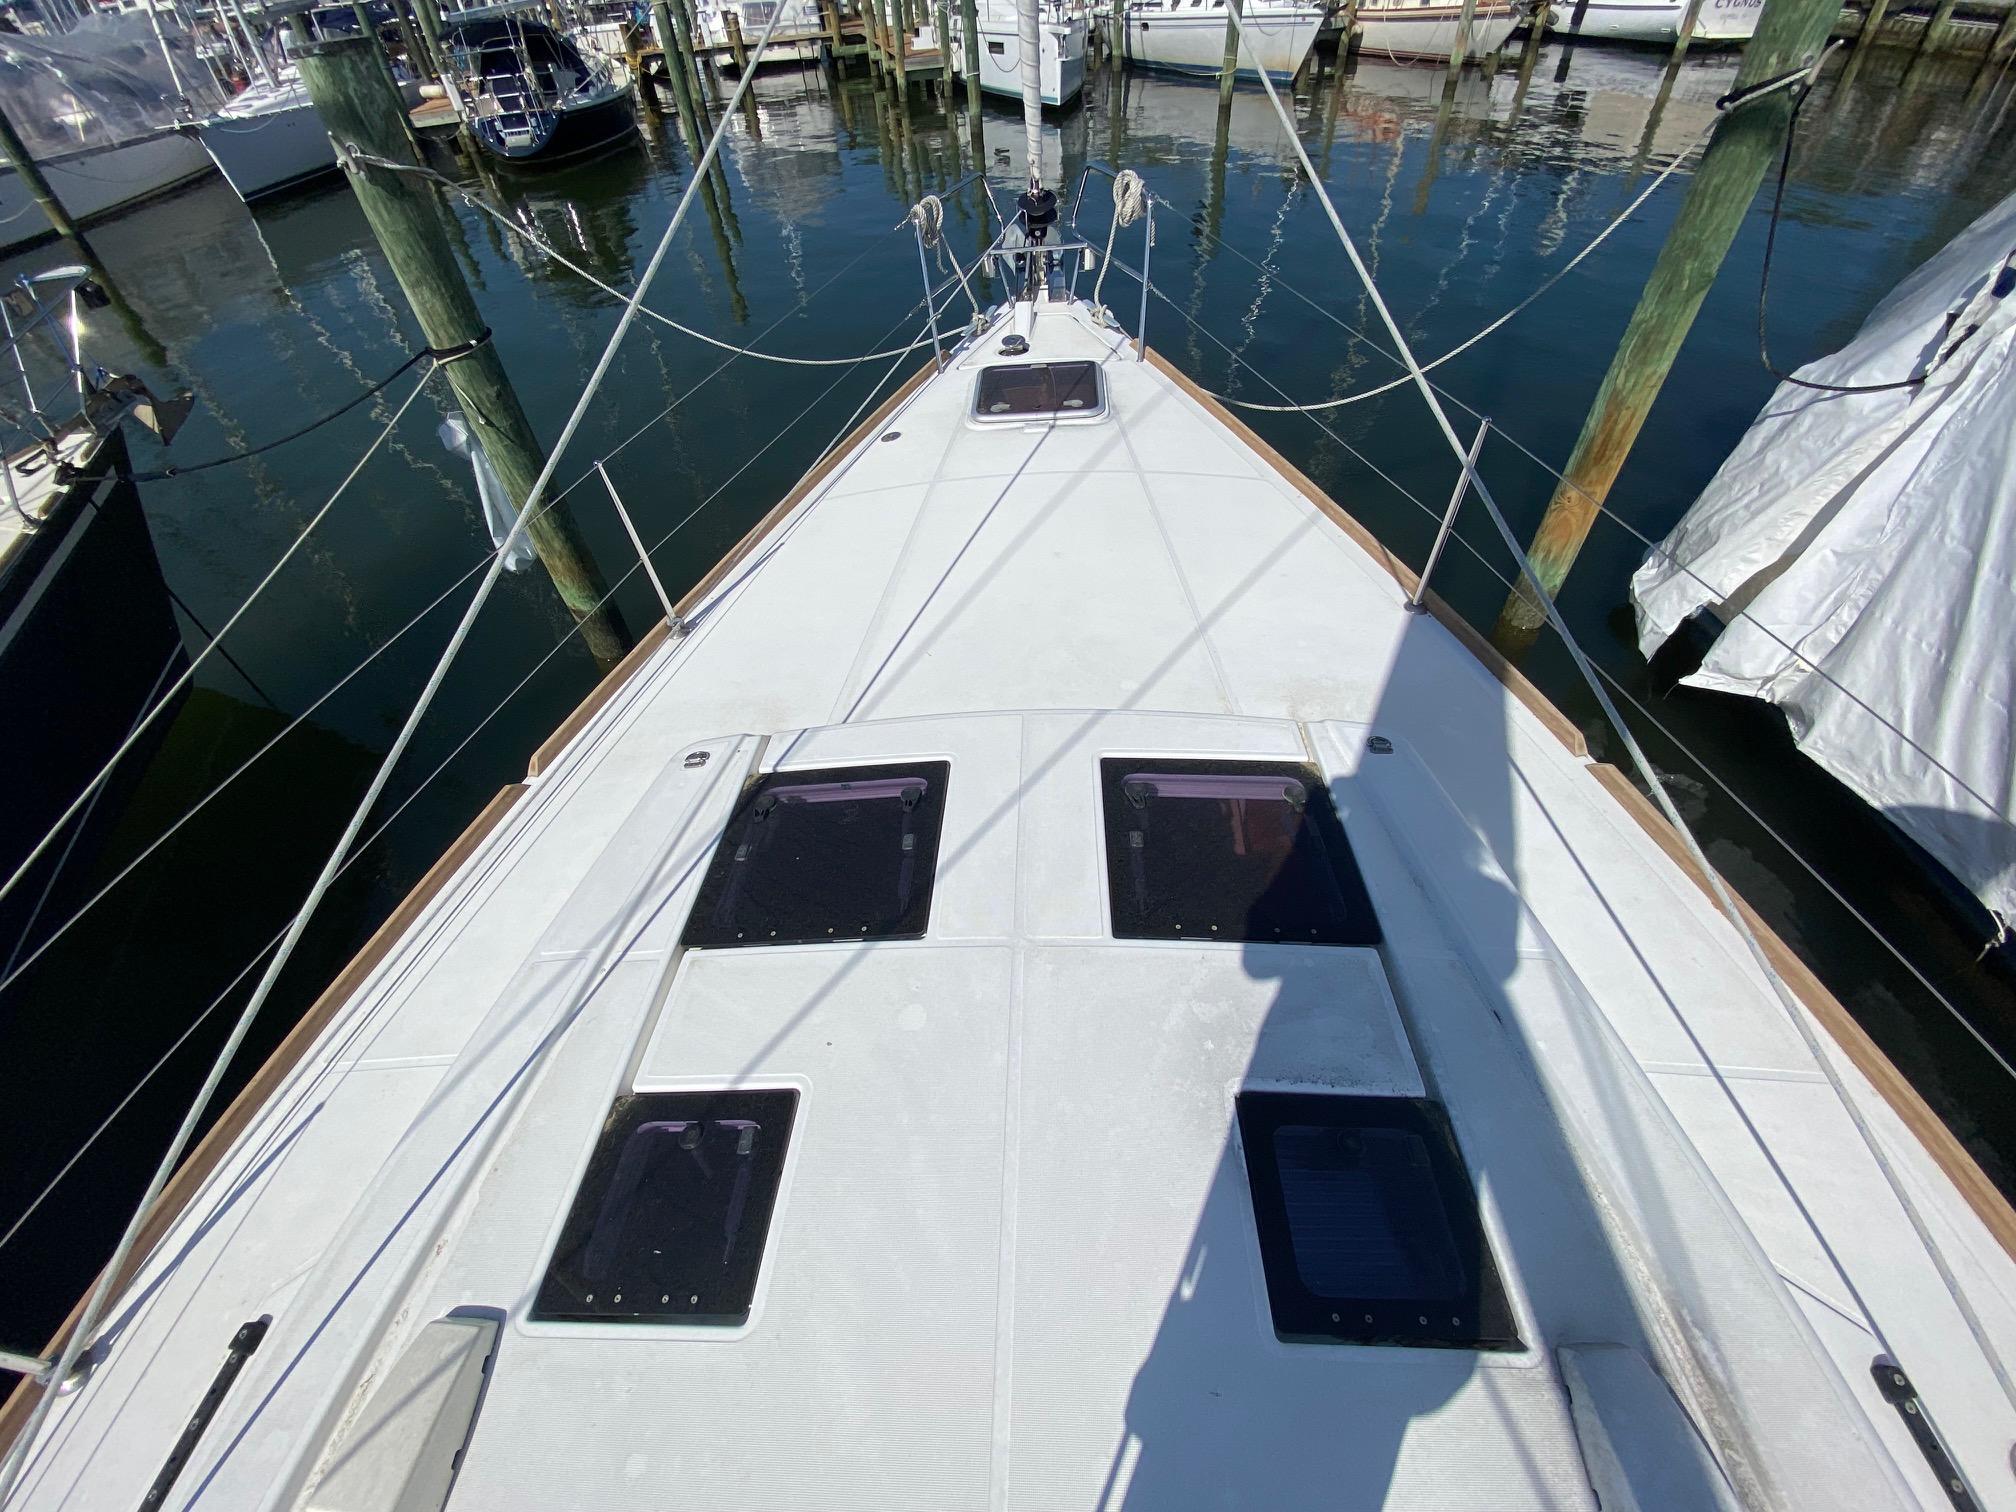 Serenity Yacht Brokers Of Annapolis